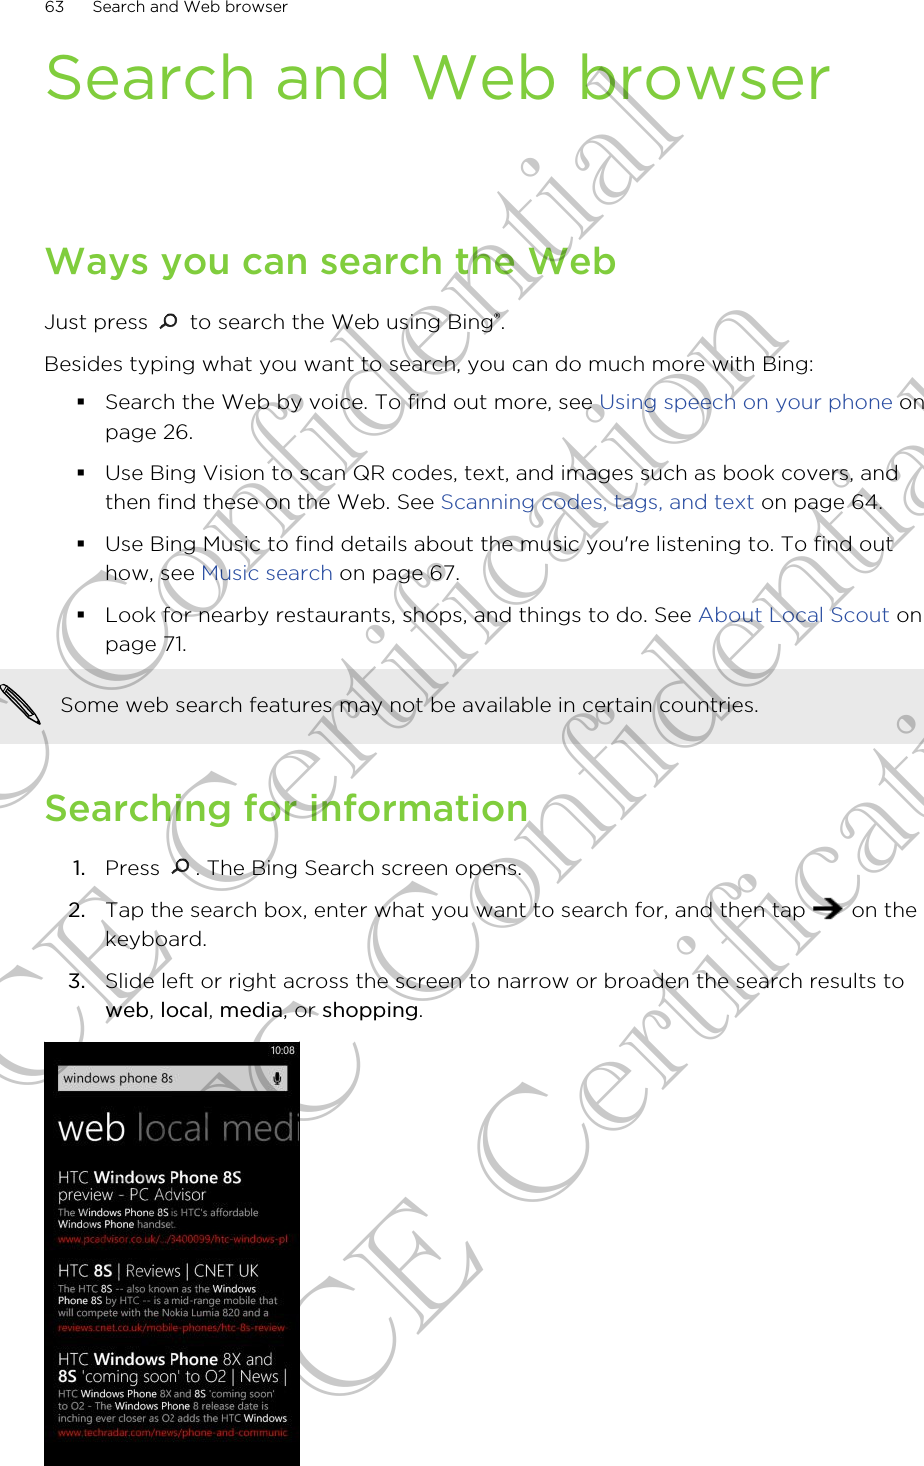 Search and Web browserWays you can search the WebJust press   to search the Web using Bing®.Besides typing what you want to search, you can do much more with Bing:§Search the Web by voice. To find out more, see Using speech on your phone onpage 26.§Use Bing Vision to scan QR codes, text, and images such as book covers, andthen find these on the Web. See Scanning codes, tags, and text on page 64.§Use Bing Music to find details about the music you&apos;re listening to. To find outhow, see Music search on page 67.§Look for nearby restaurants, shops, and things to do. See About Local Scout onpage 71.Some web search features may not be available in certain countries.Searching for information1. Press  . The Bing Search screen opens.2. Tap the search box, enter what you want to search for, and then tap   on thekeyboard.3. Slide left or right across the screen to narrow or broaden the search results toweb, local, media, or shopping.63 Search and Web browserHTC Confidential CE Certification HTC Confidential CE Certification